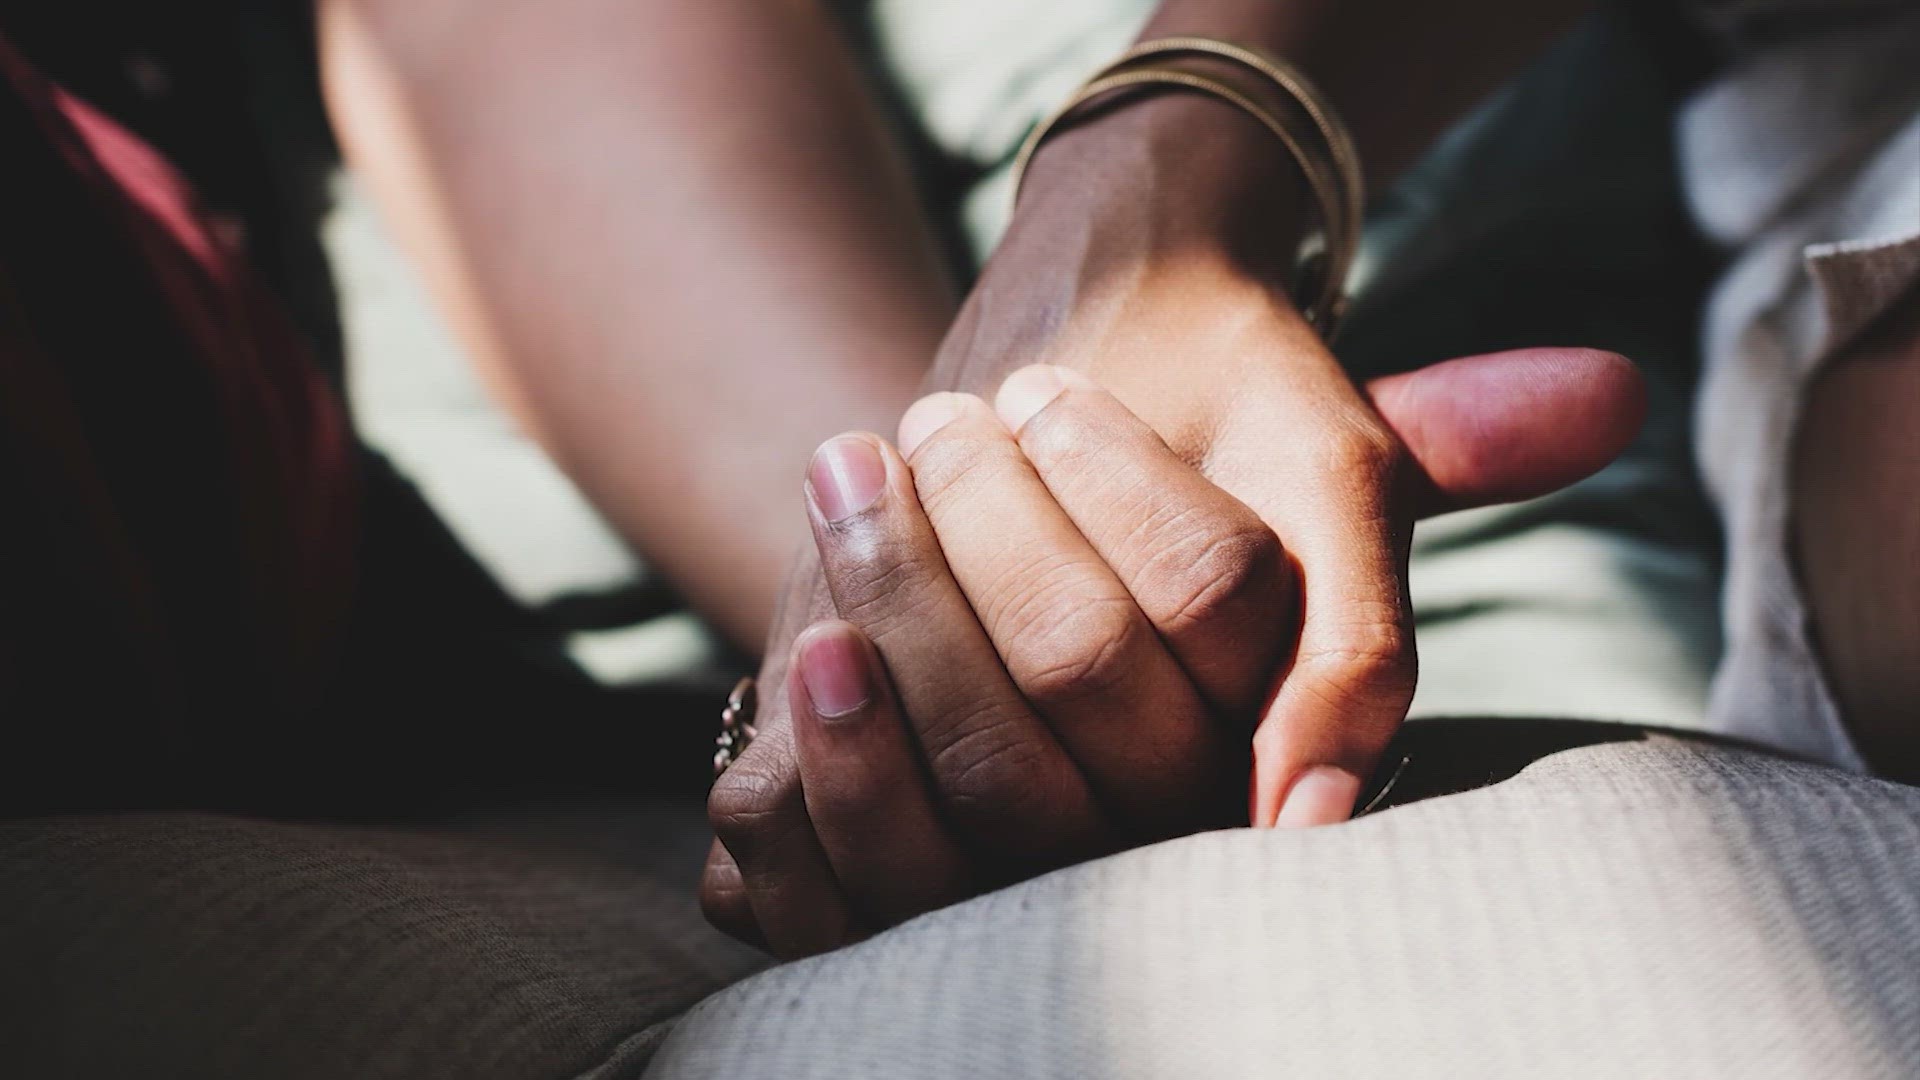 Holding hands with someone you love can have a powerful effect on our brains.